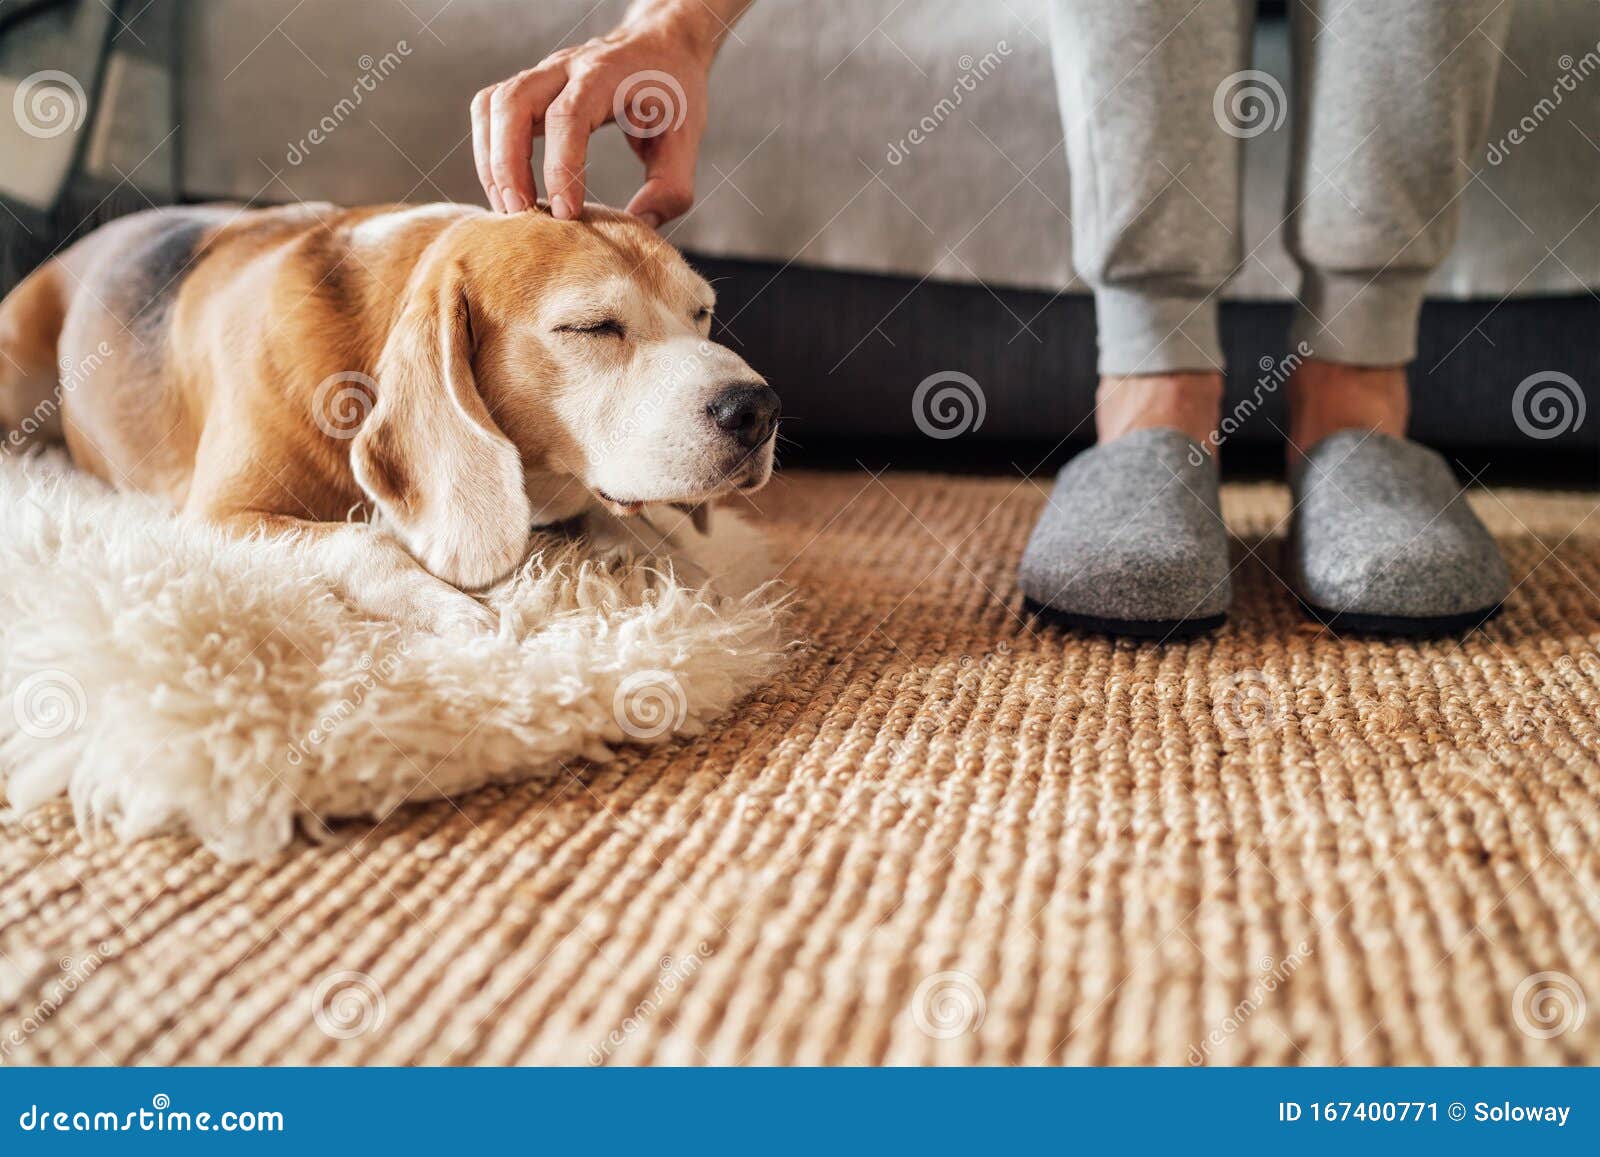 beagle dog owner caress stroking his pet lying on the natural stroking dog on the floor and enjoying the warm home atmosphere